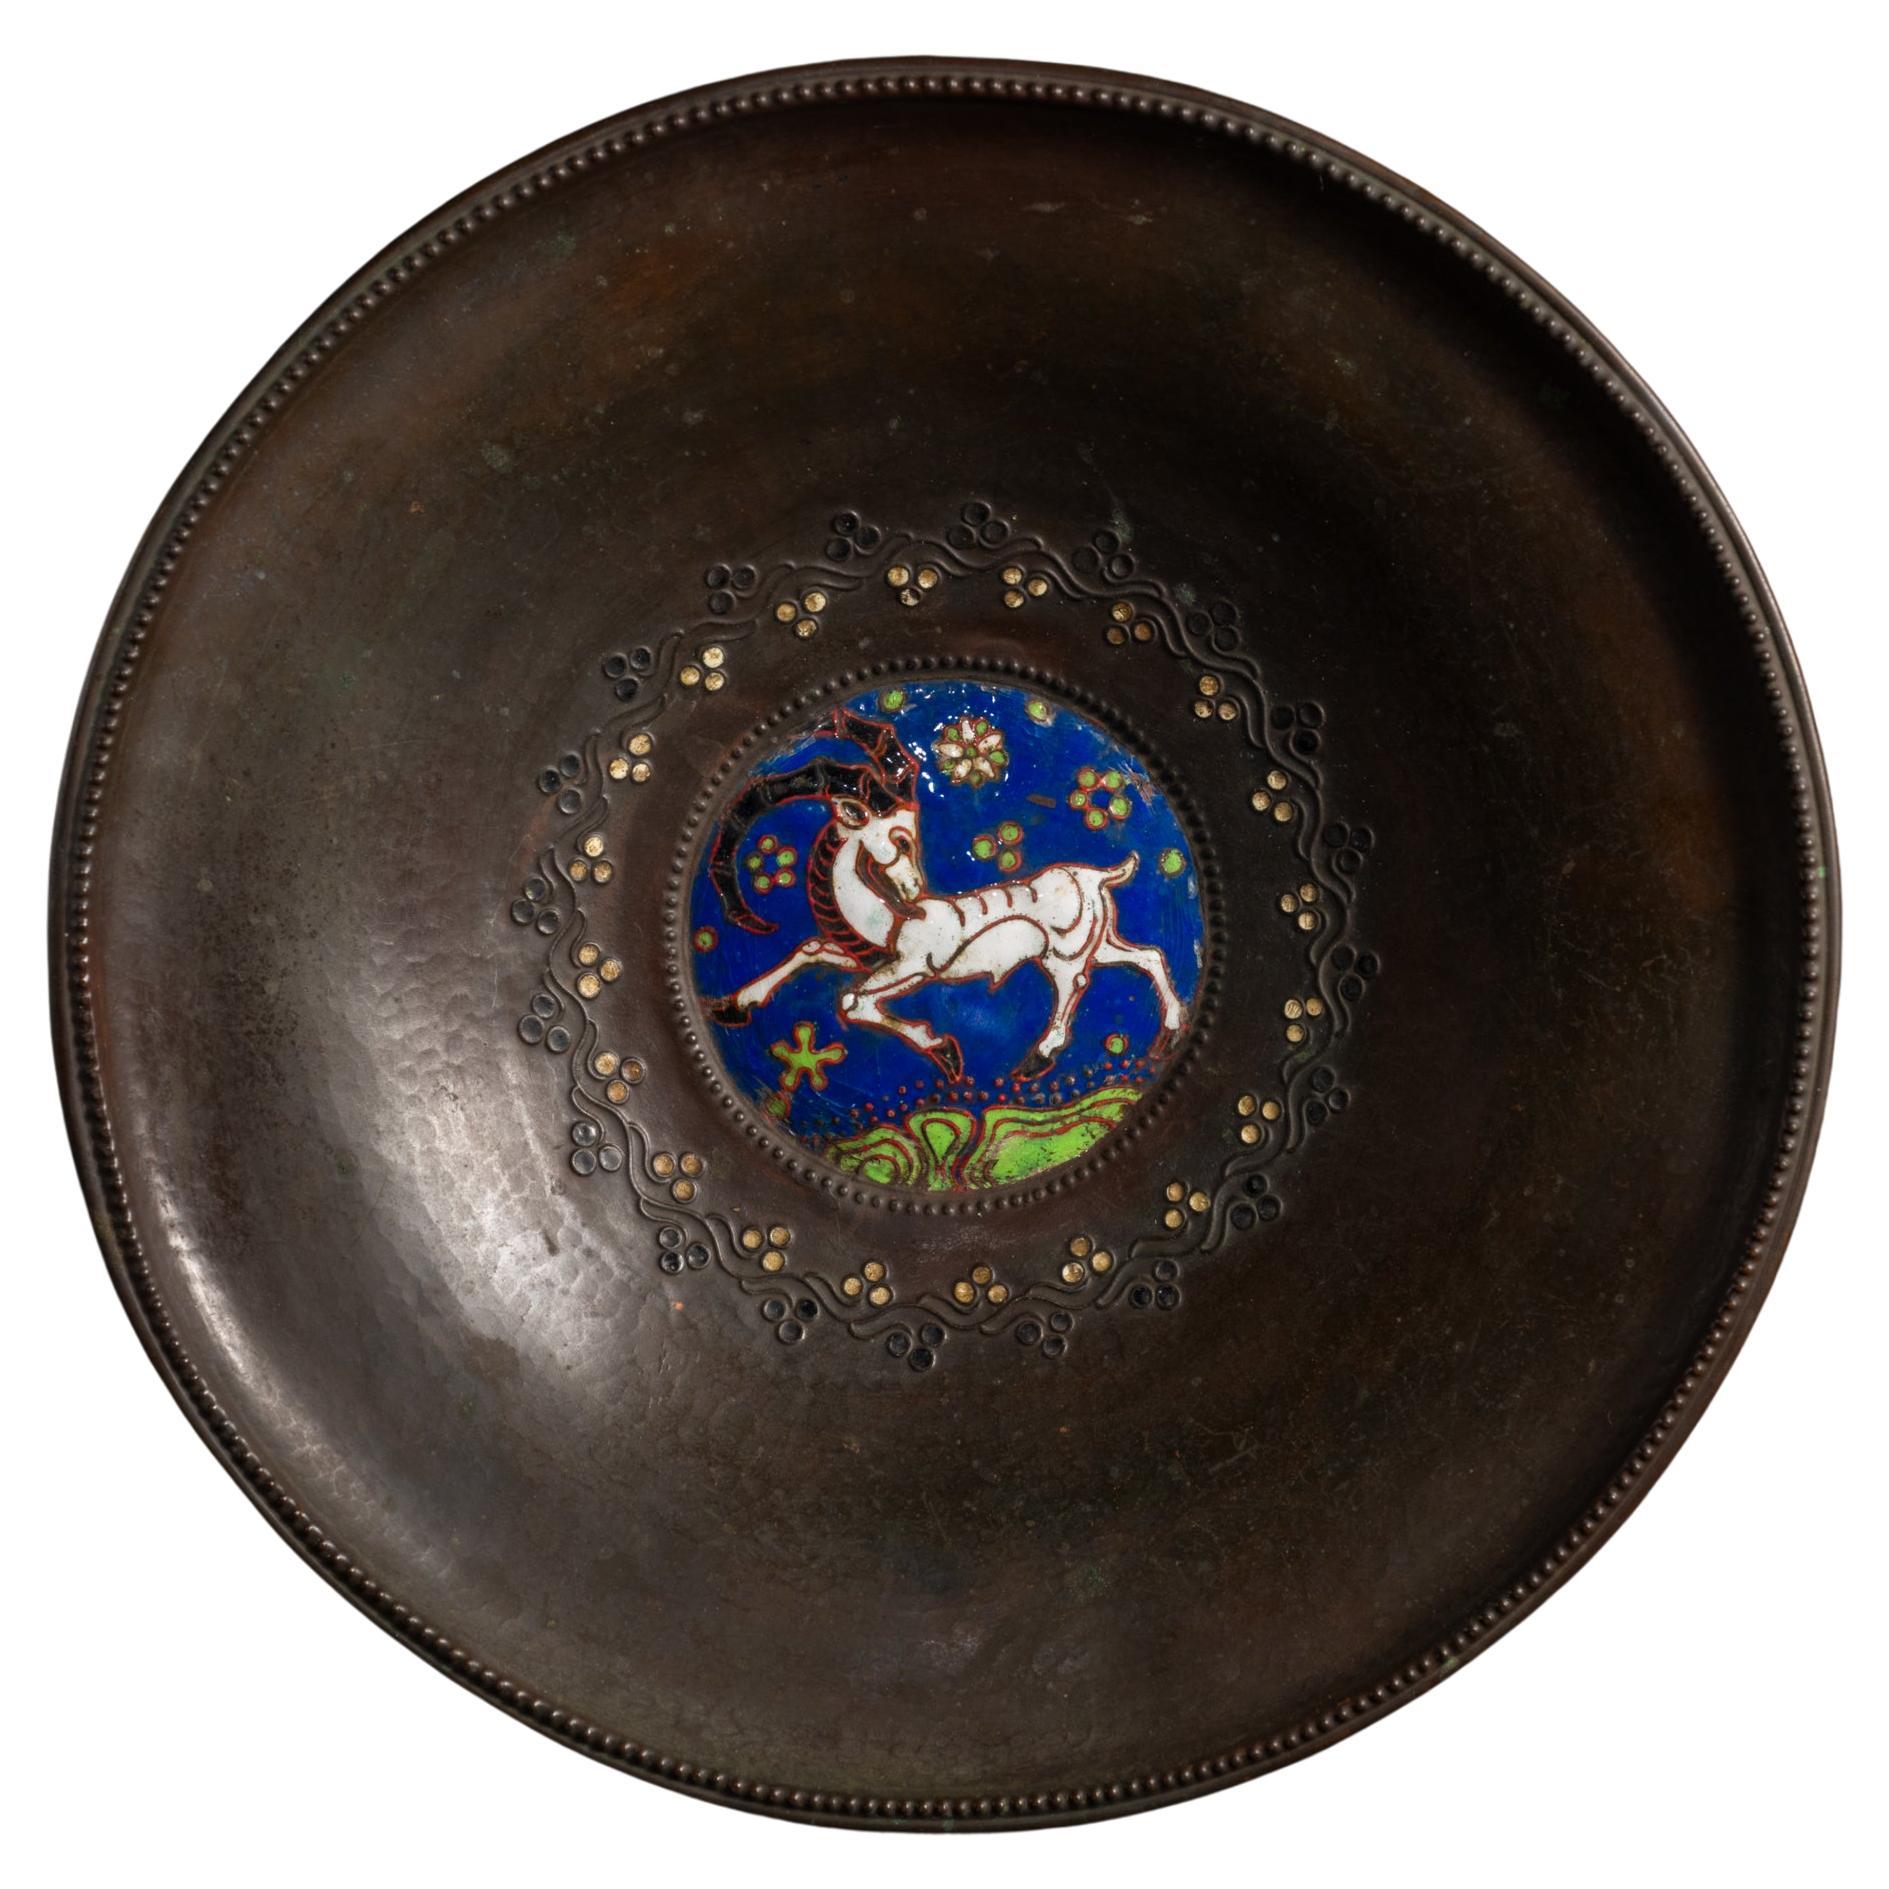 Enameled Copper Art Nouveau Dish with Ram by Ludwig Karl Maria Vierthaler